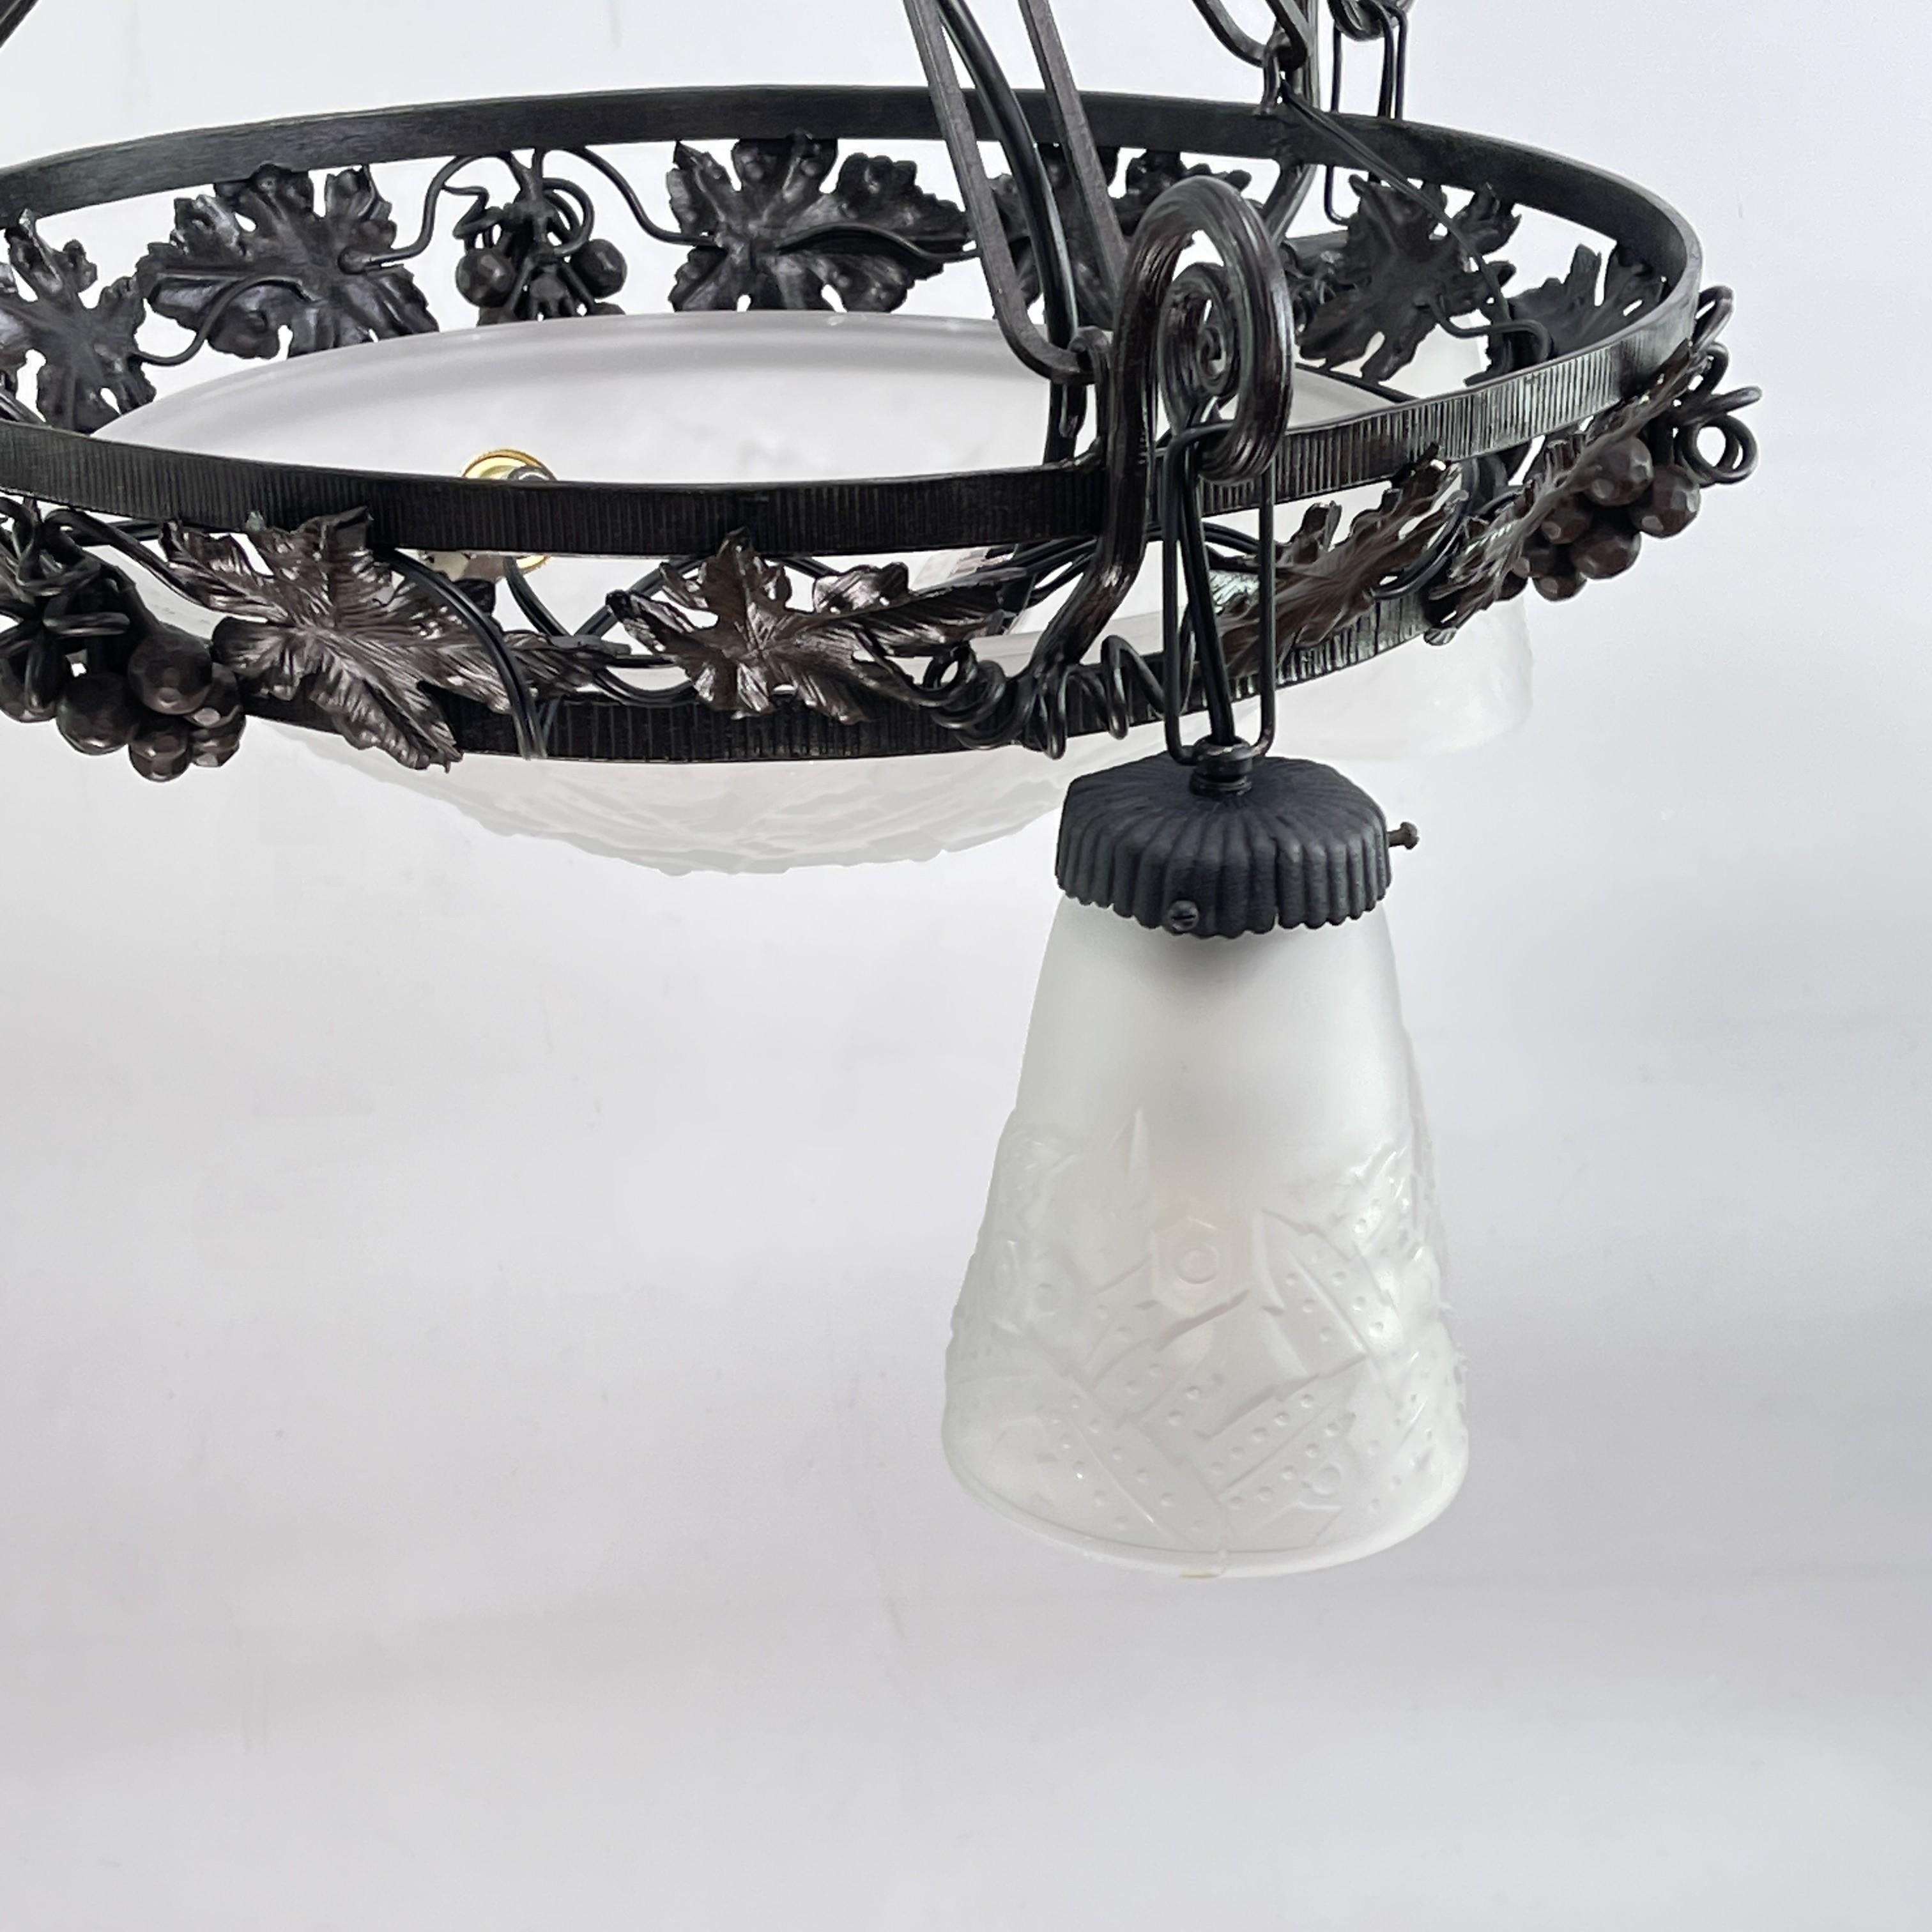 Art Deco wrought iron Ceiling Lamp by Muller Freres, Luneville, 1930s For Sale 5